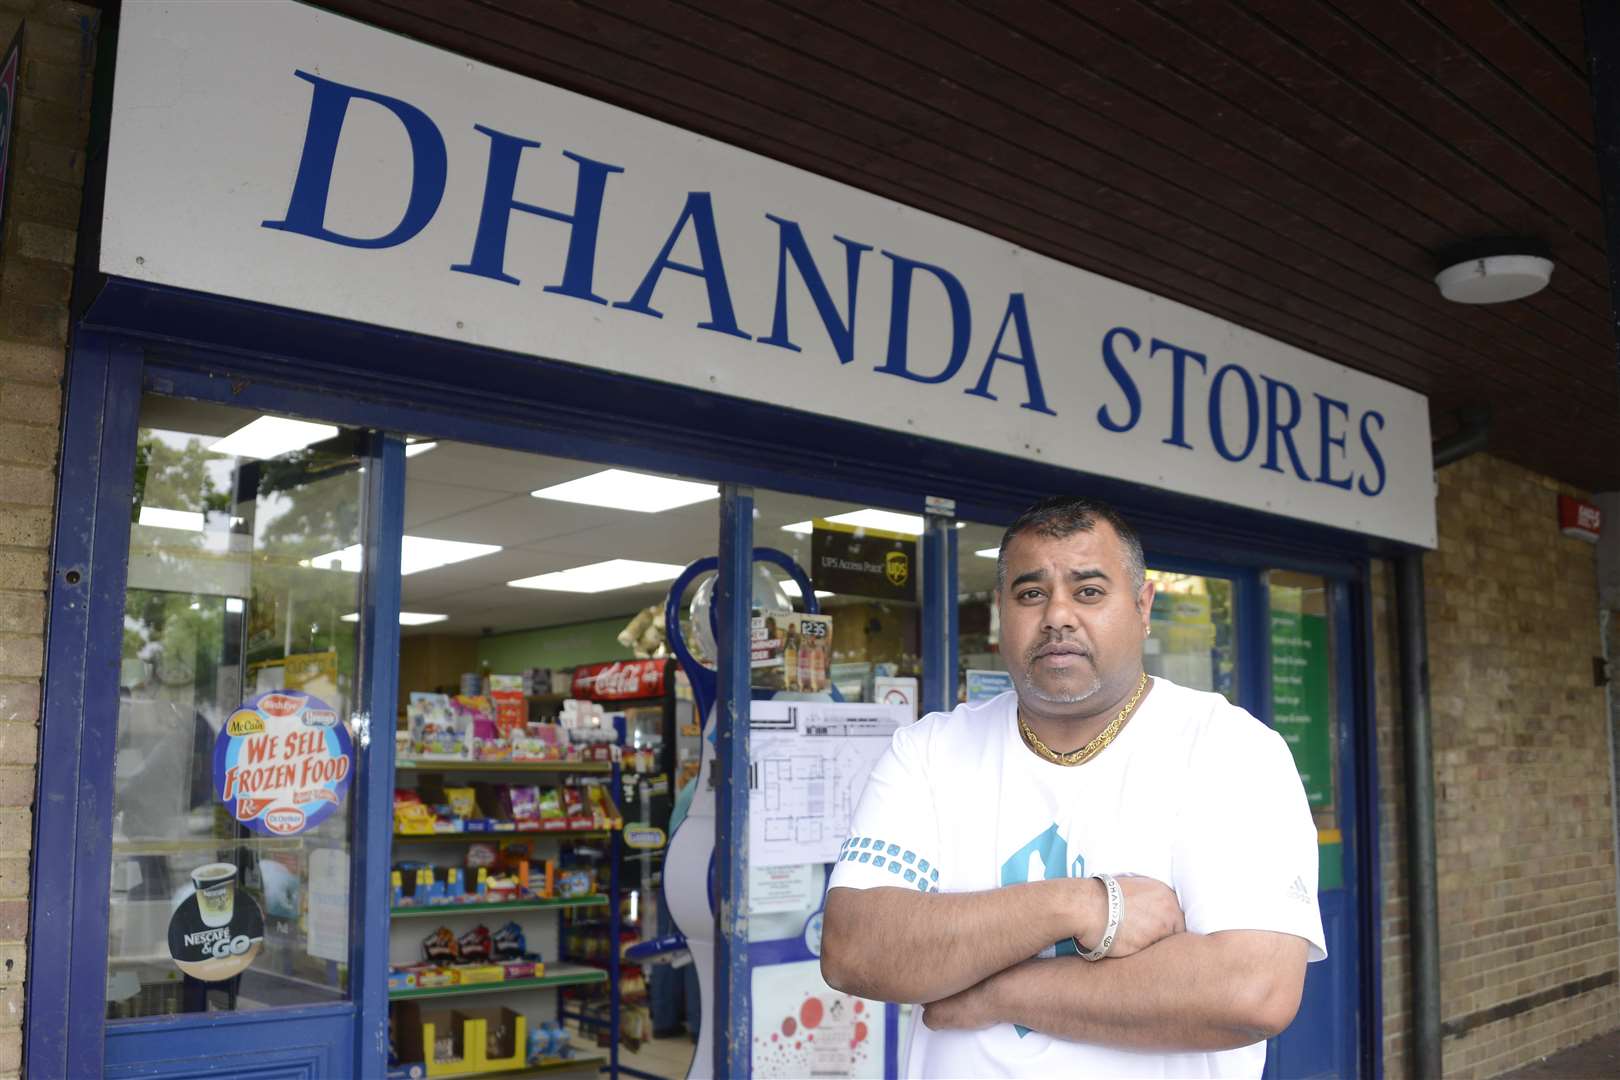 Ashford Bockhanger Community centre petition.Sunny who runs the Dhanda stores opposite the now closed community centre is rallying support for it to re openPicture: Paul Amos (2263372)